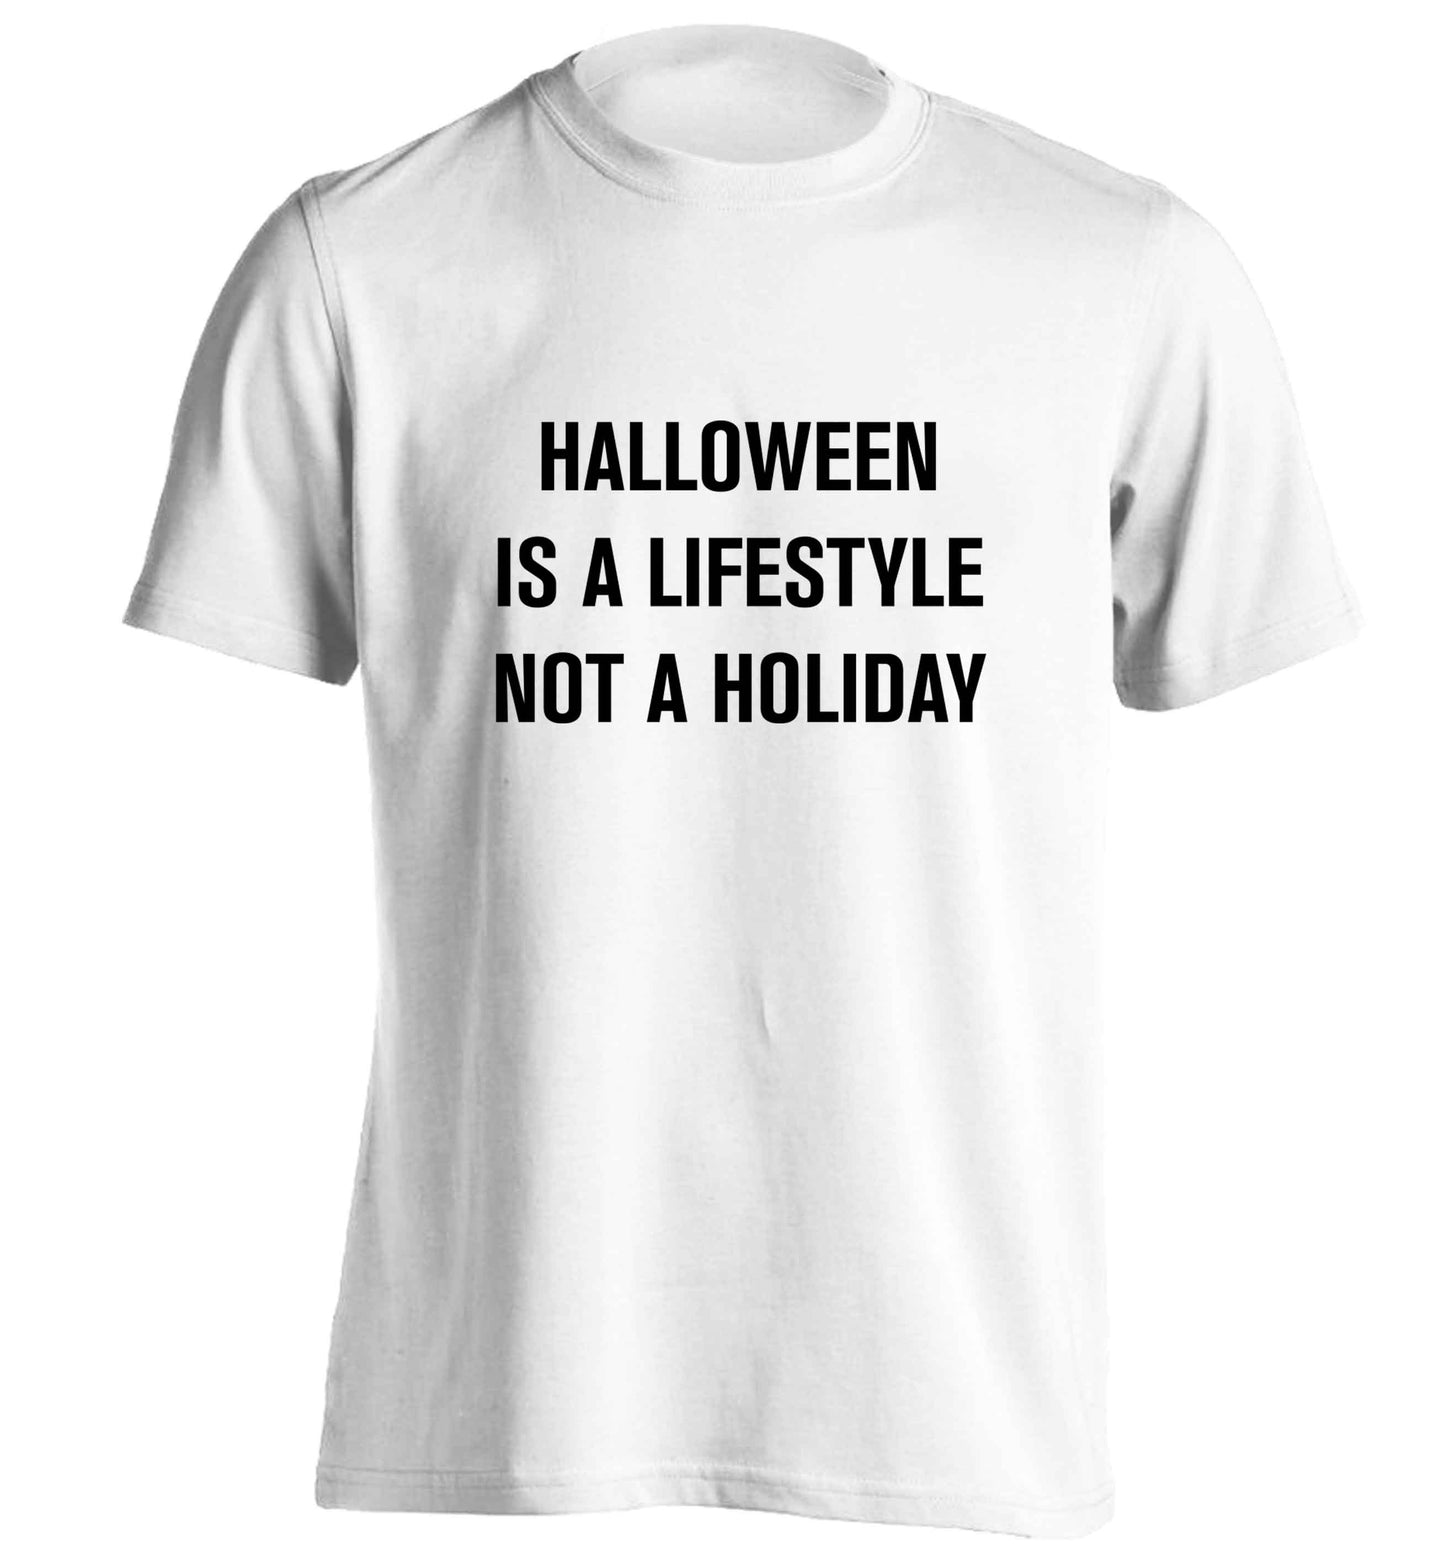 Halloween is a lifestyle not a holiday adults unisex white Tshirt 2XL